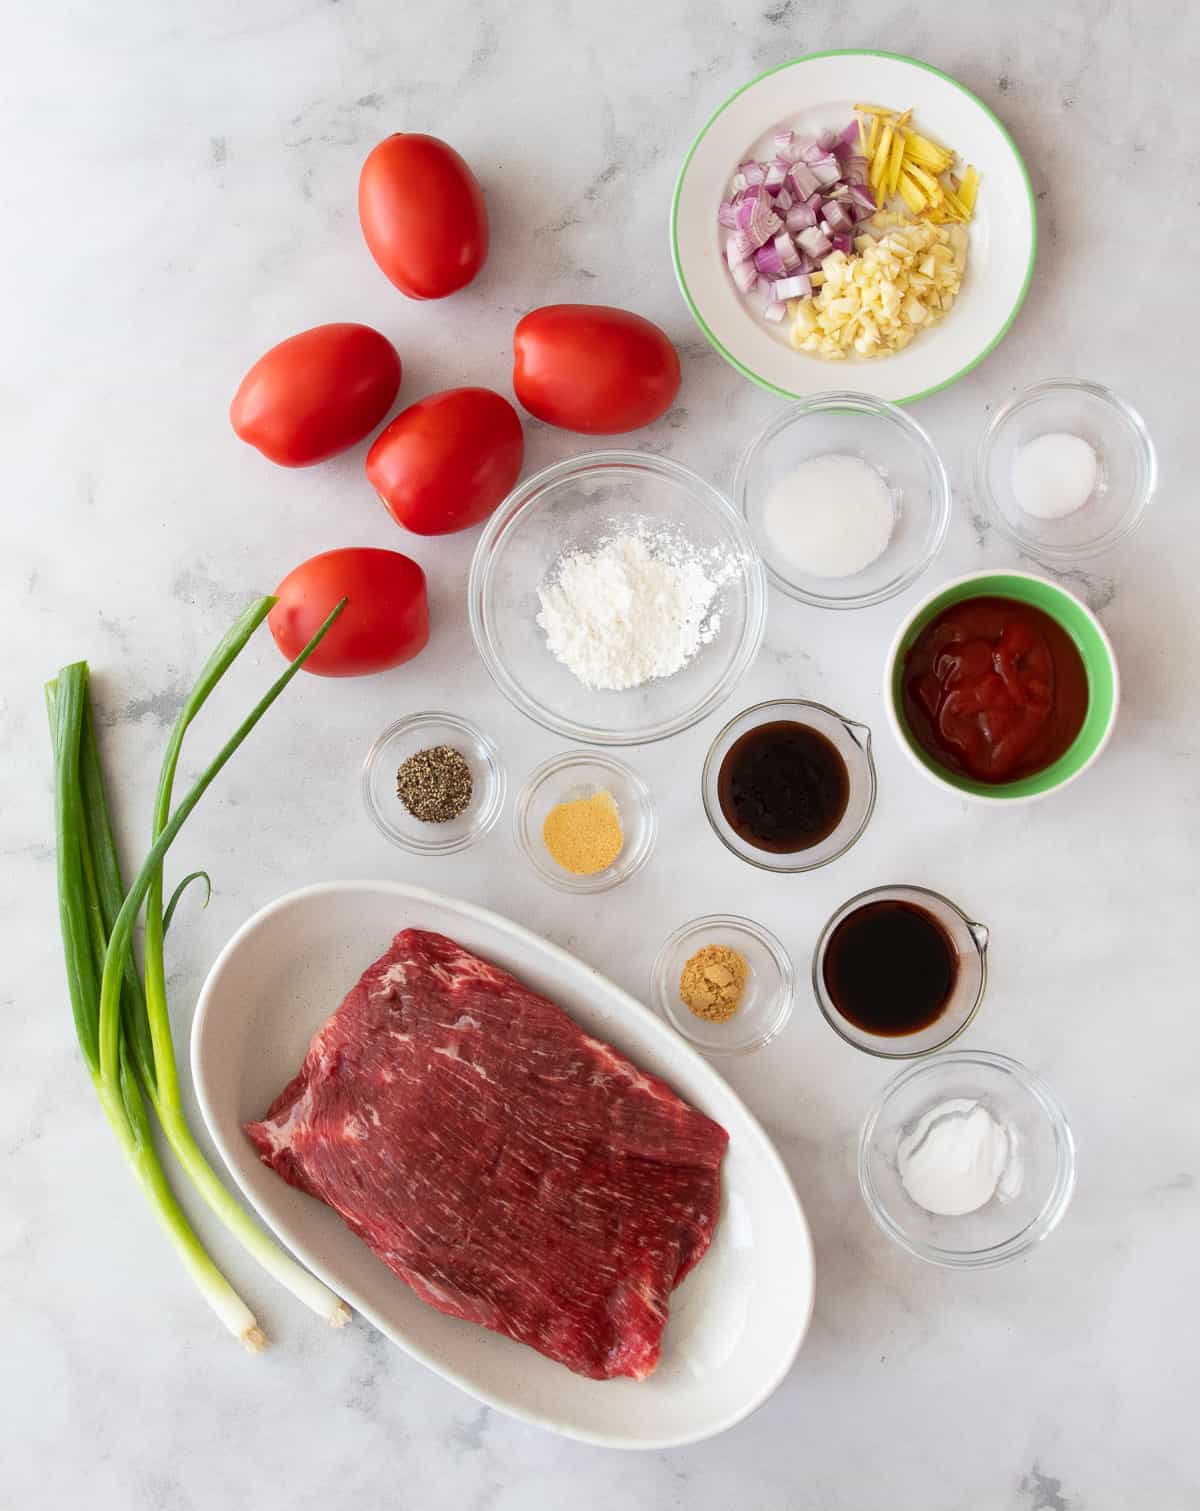 ingredients for tomato beef stir fry